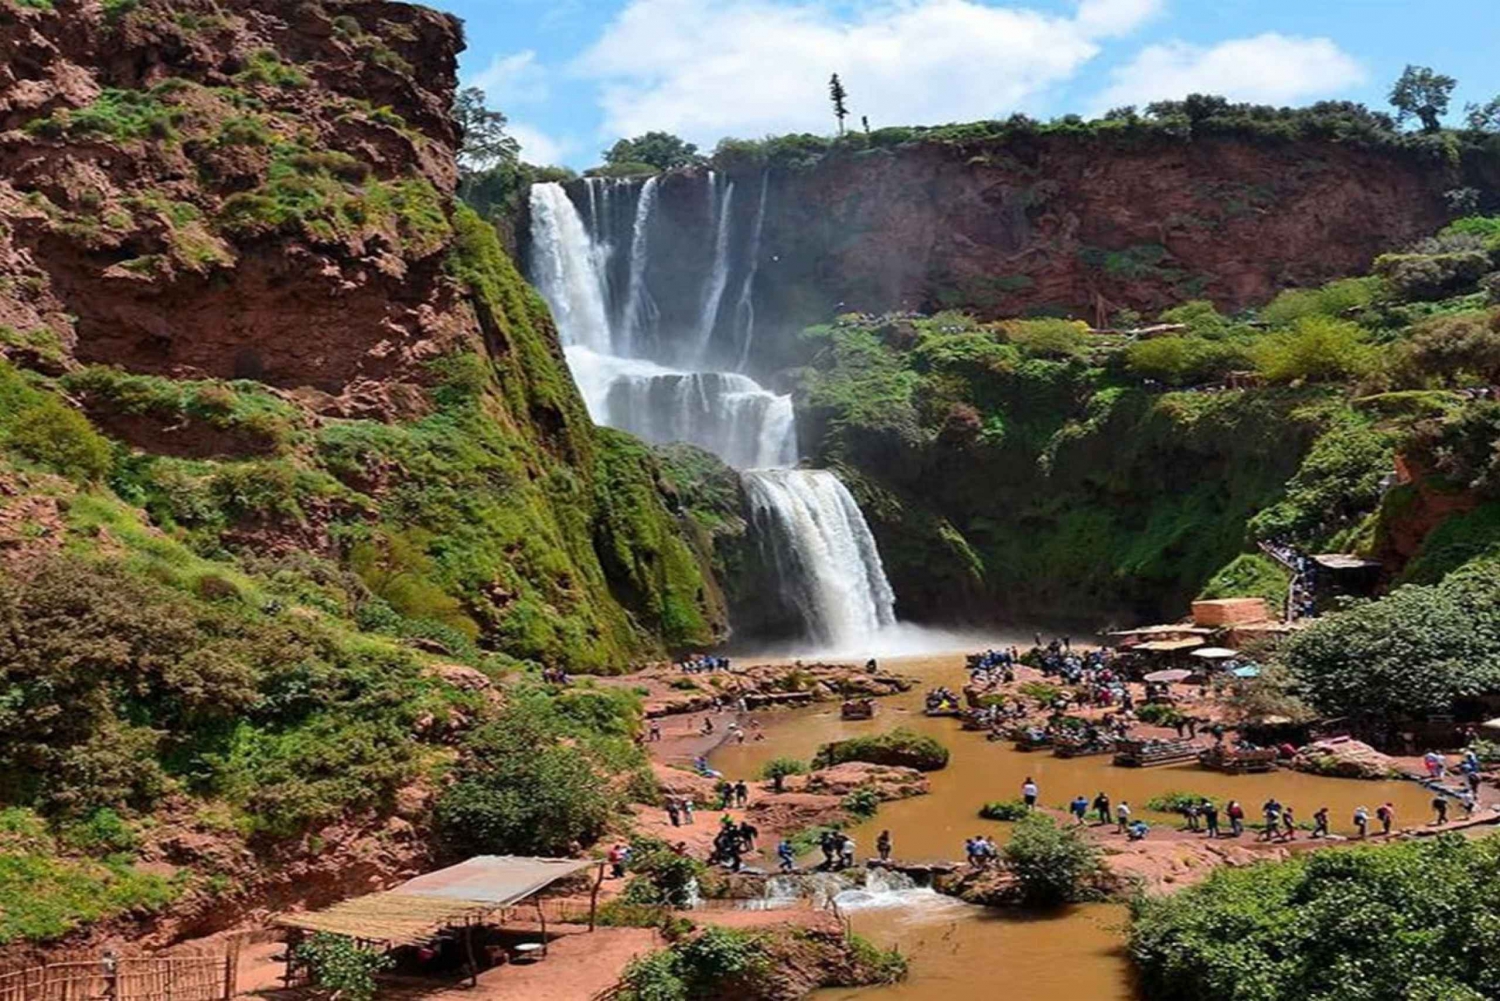 Full day Ouzoud waterfalls Day tour & Guided Walk